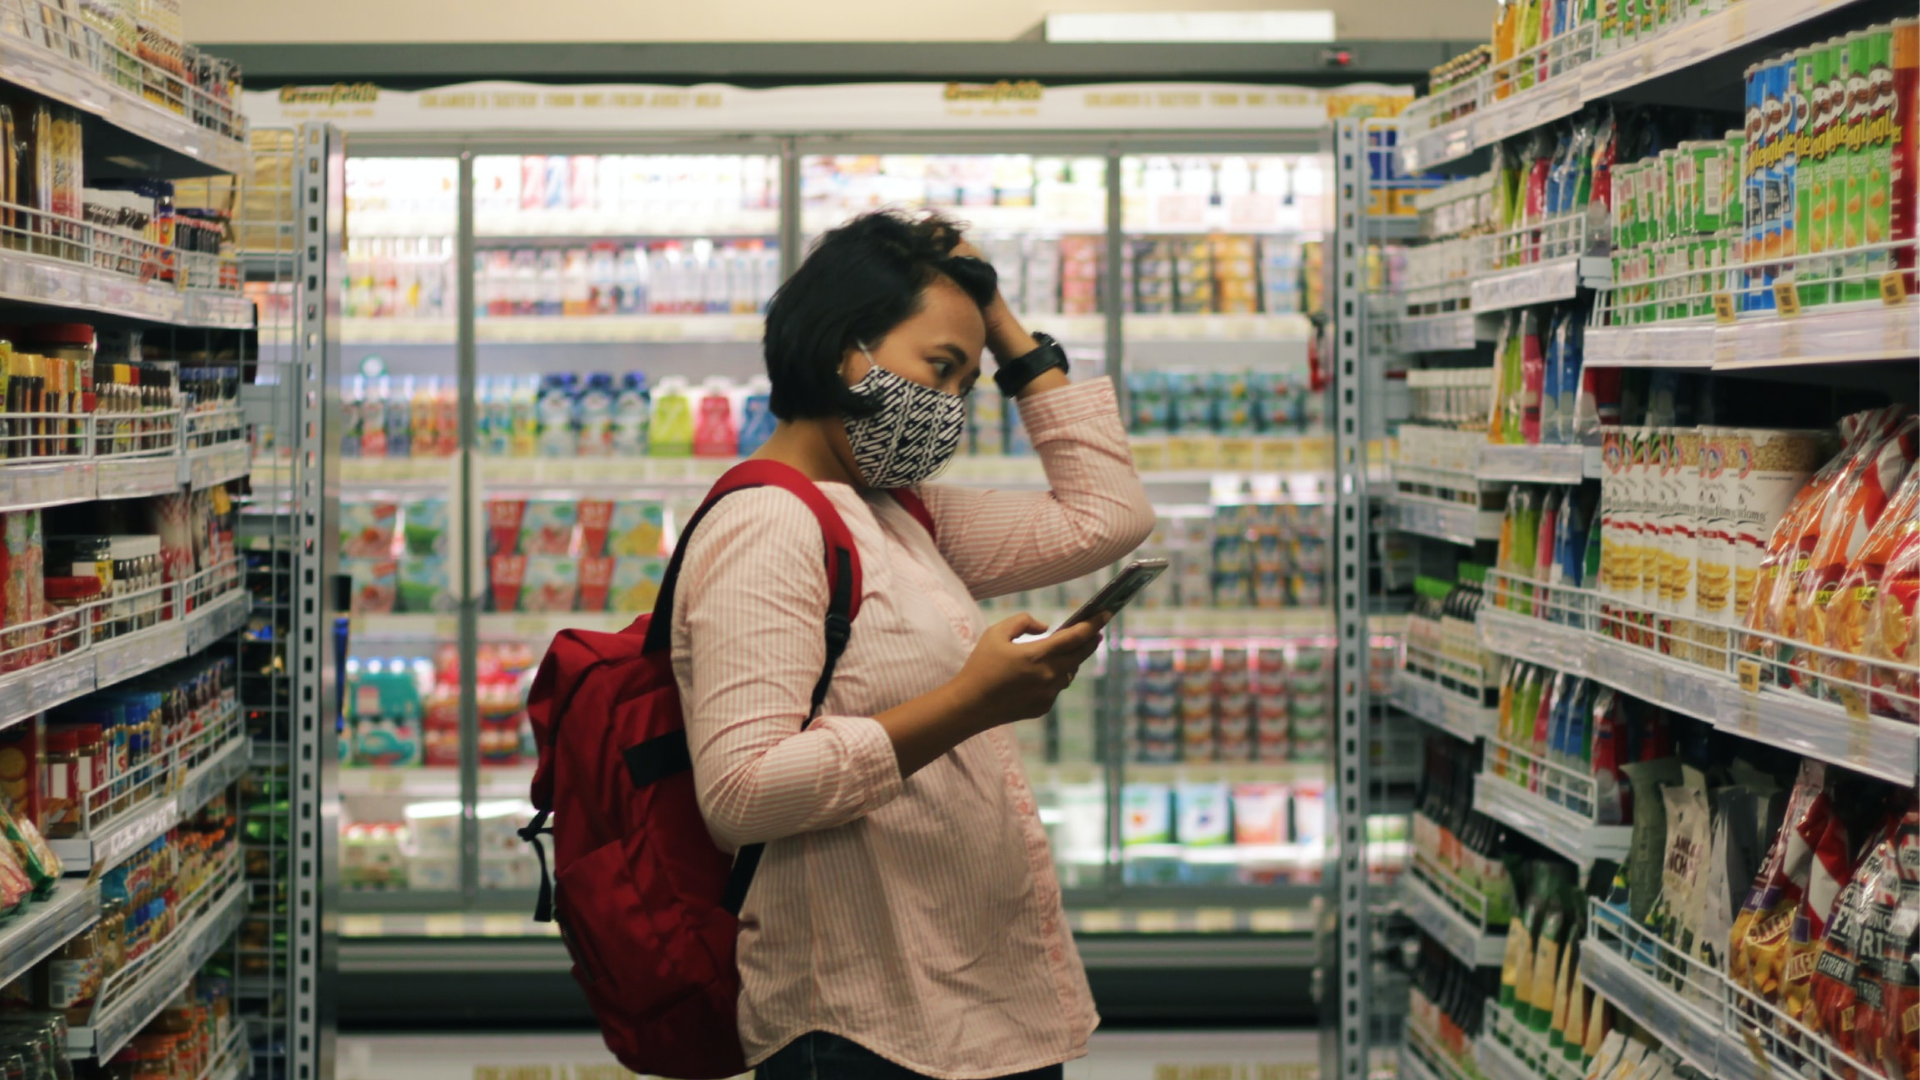 Woman holding phone in one hand and grasping her hair with other hand appears stressed looking at grocery store shelves